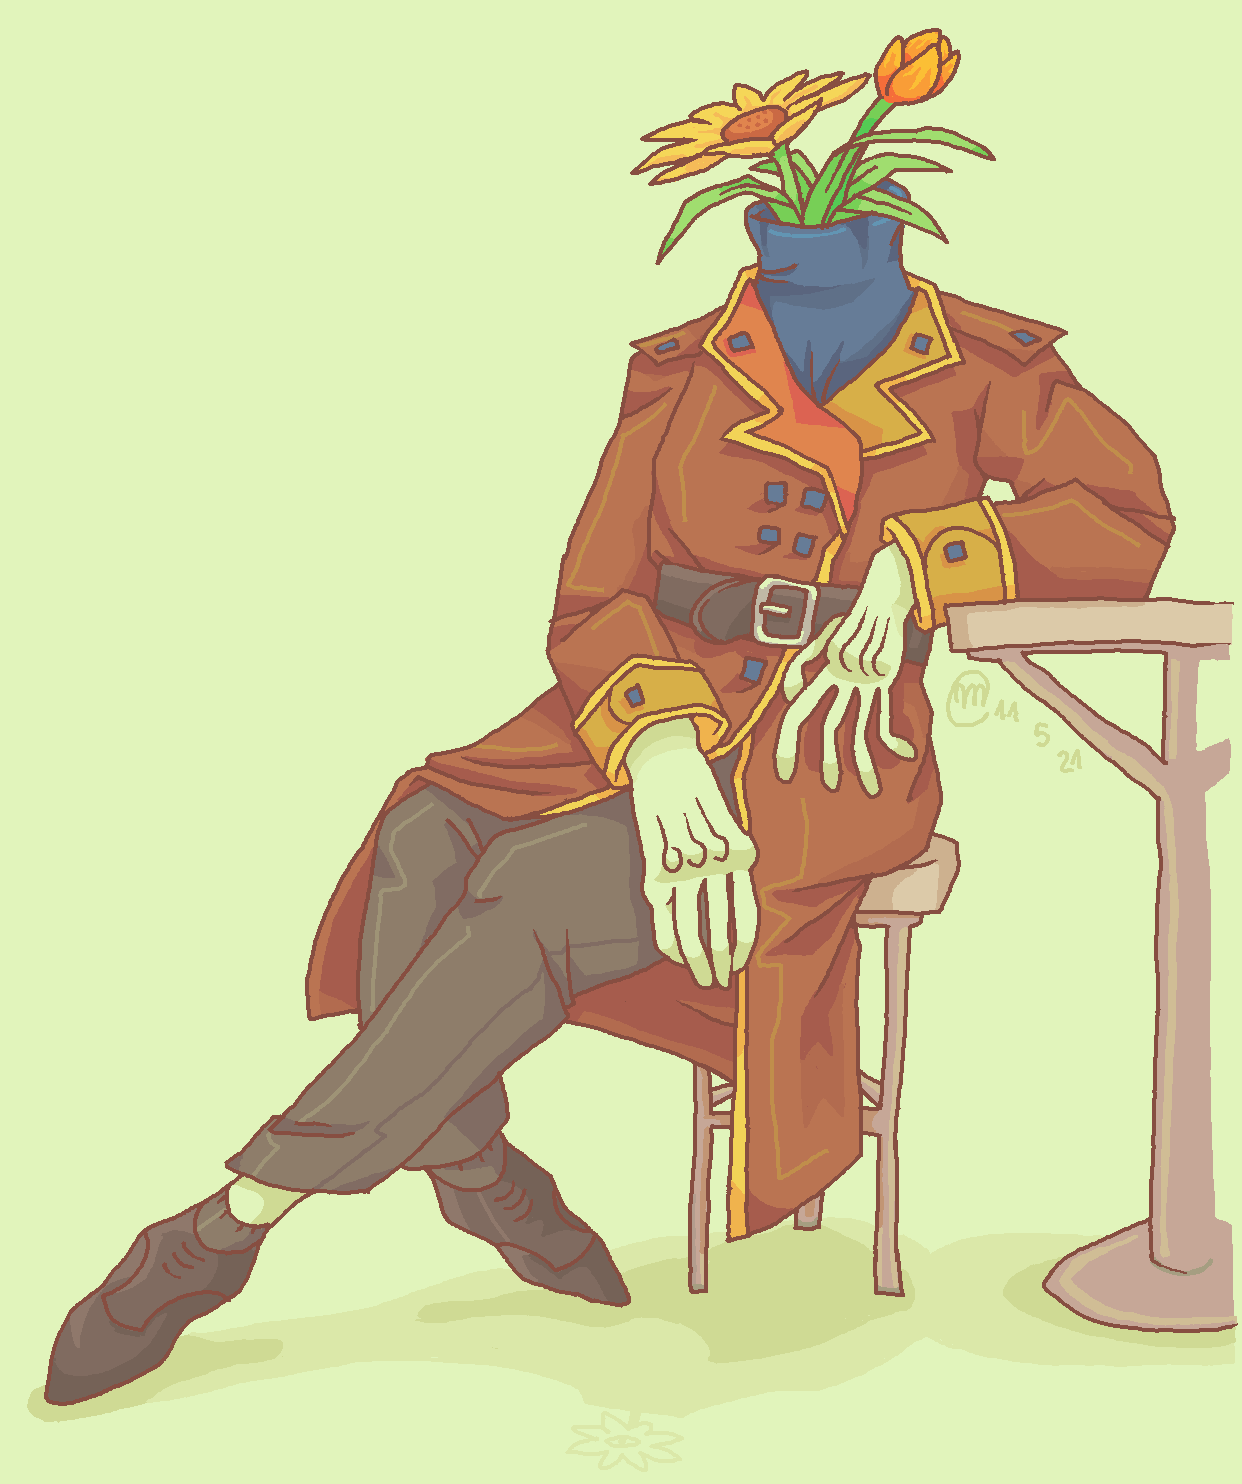 A drawing of a person wearing a brown trenchcoat wearing dark grey pants and shoes, sitting on a stool and leaning against a table. They have flowers and grass in place of a head.